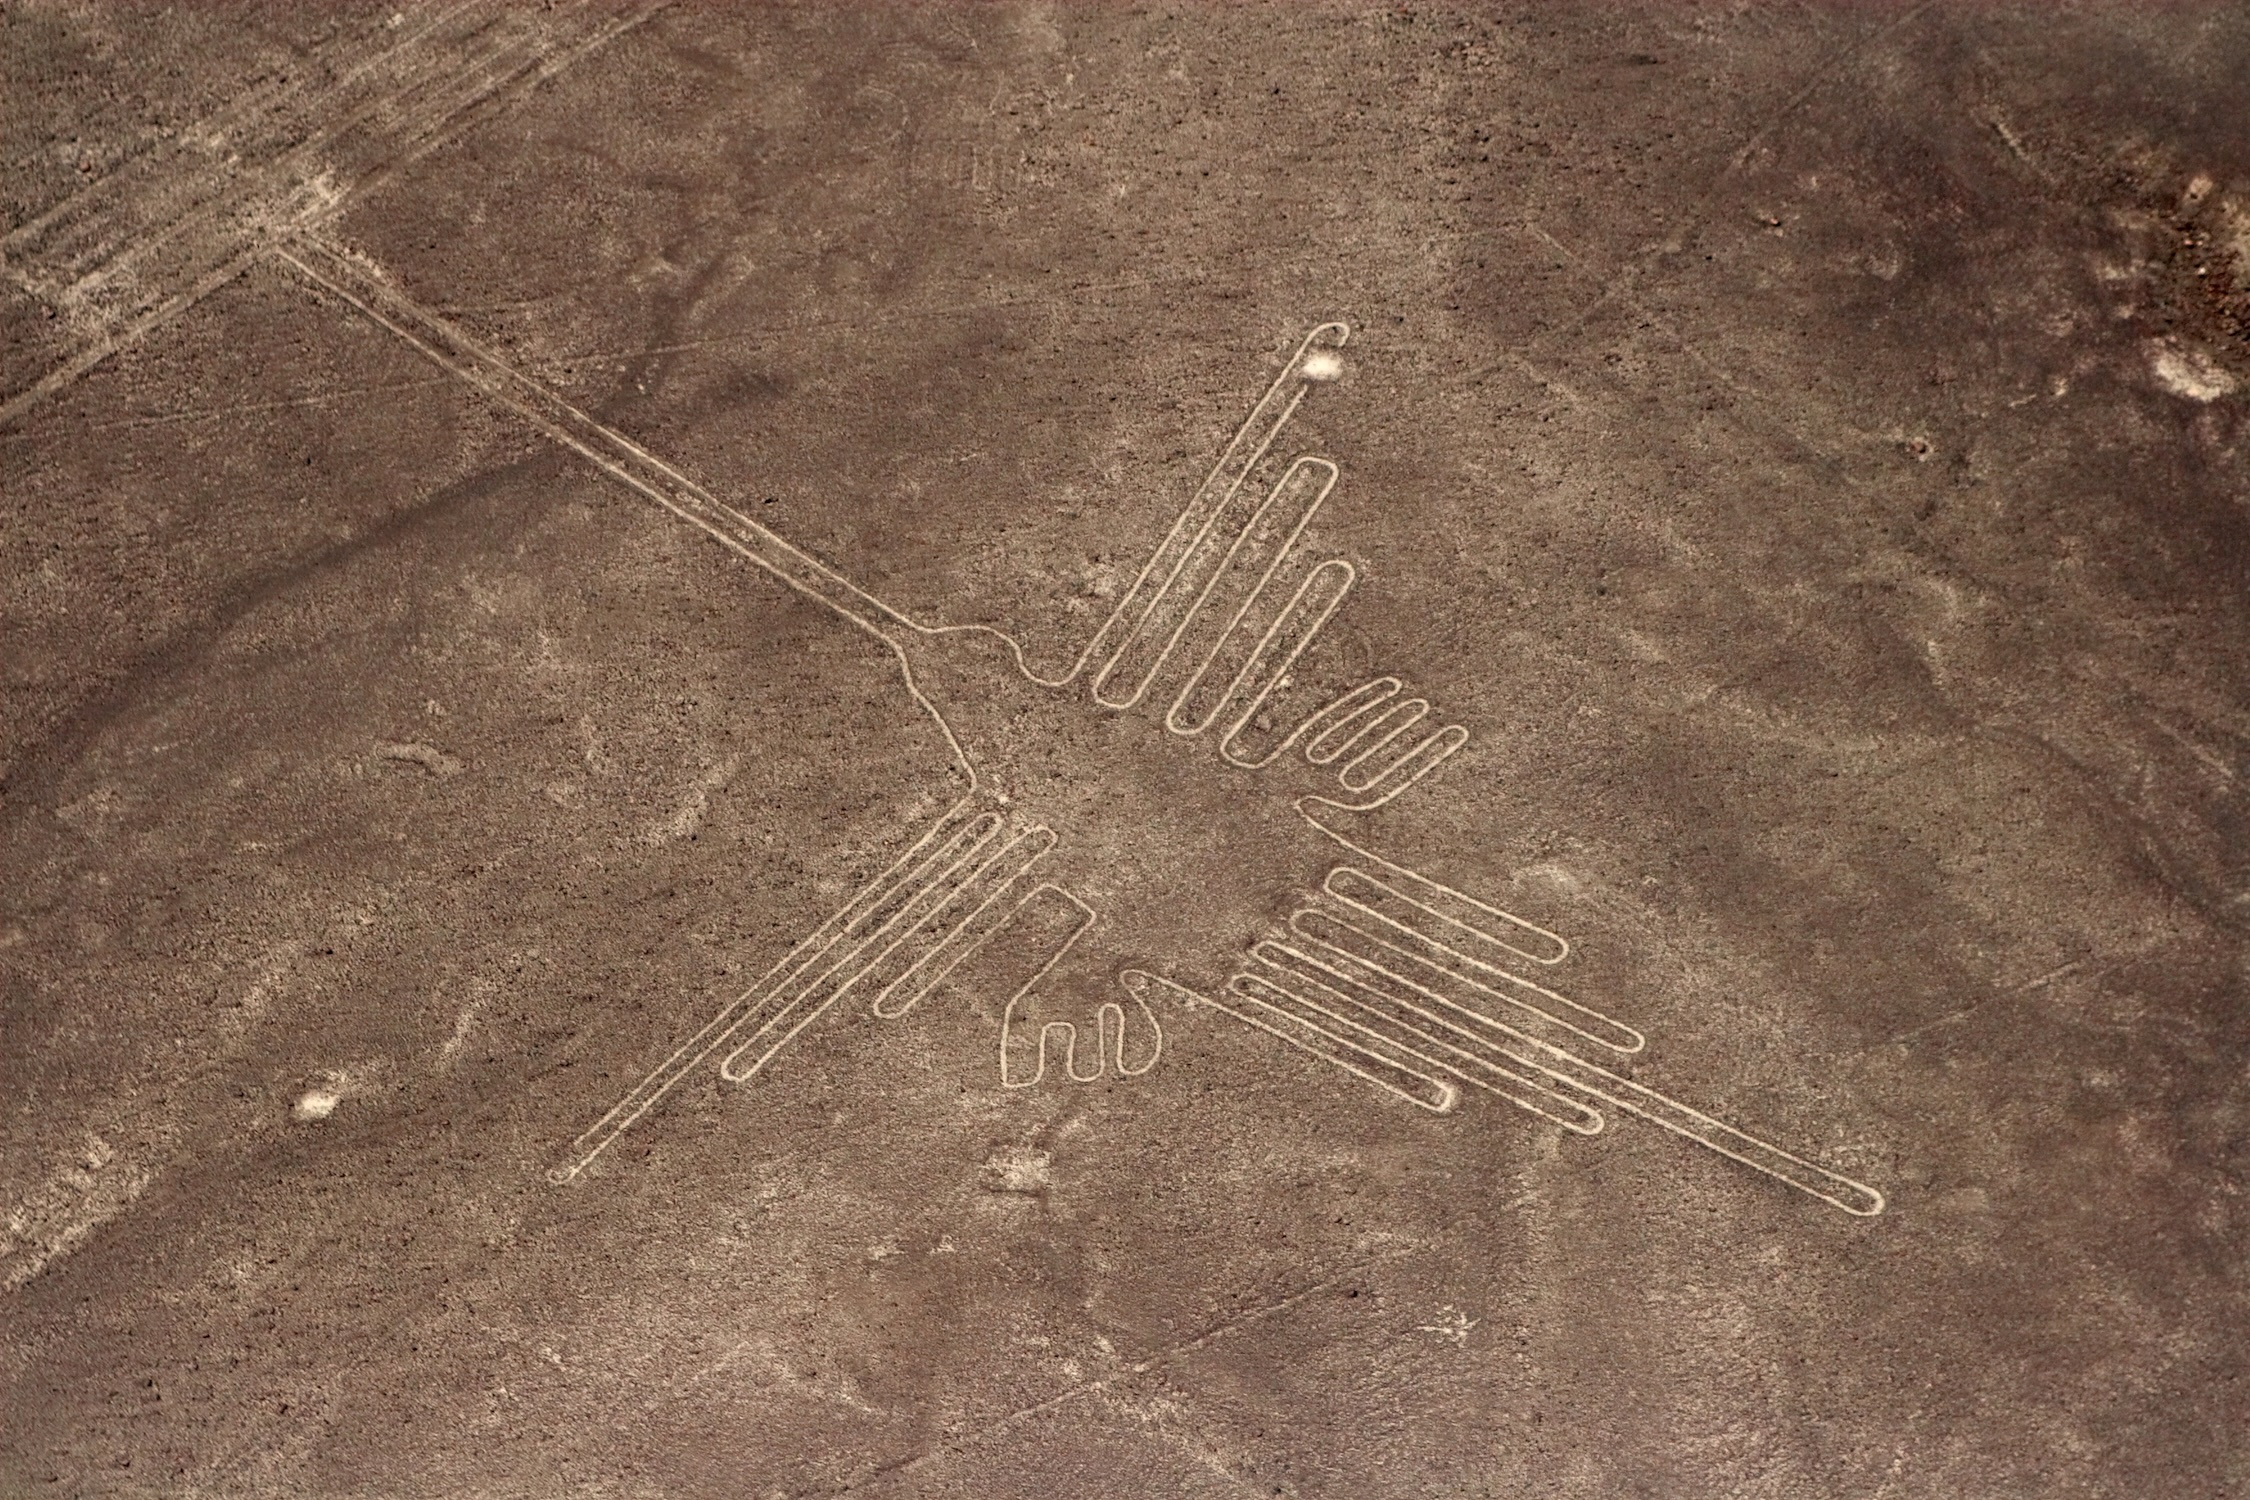 Aerial view of the hummingbird geoglyph Nazca lines in Peru. Image credit: © King Ho Yim, Dreamstime